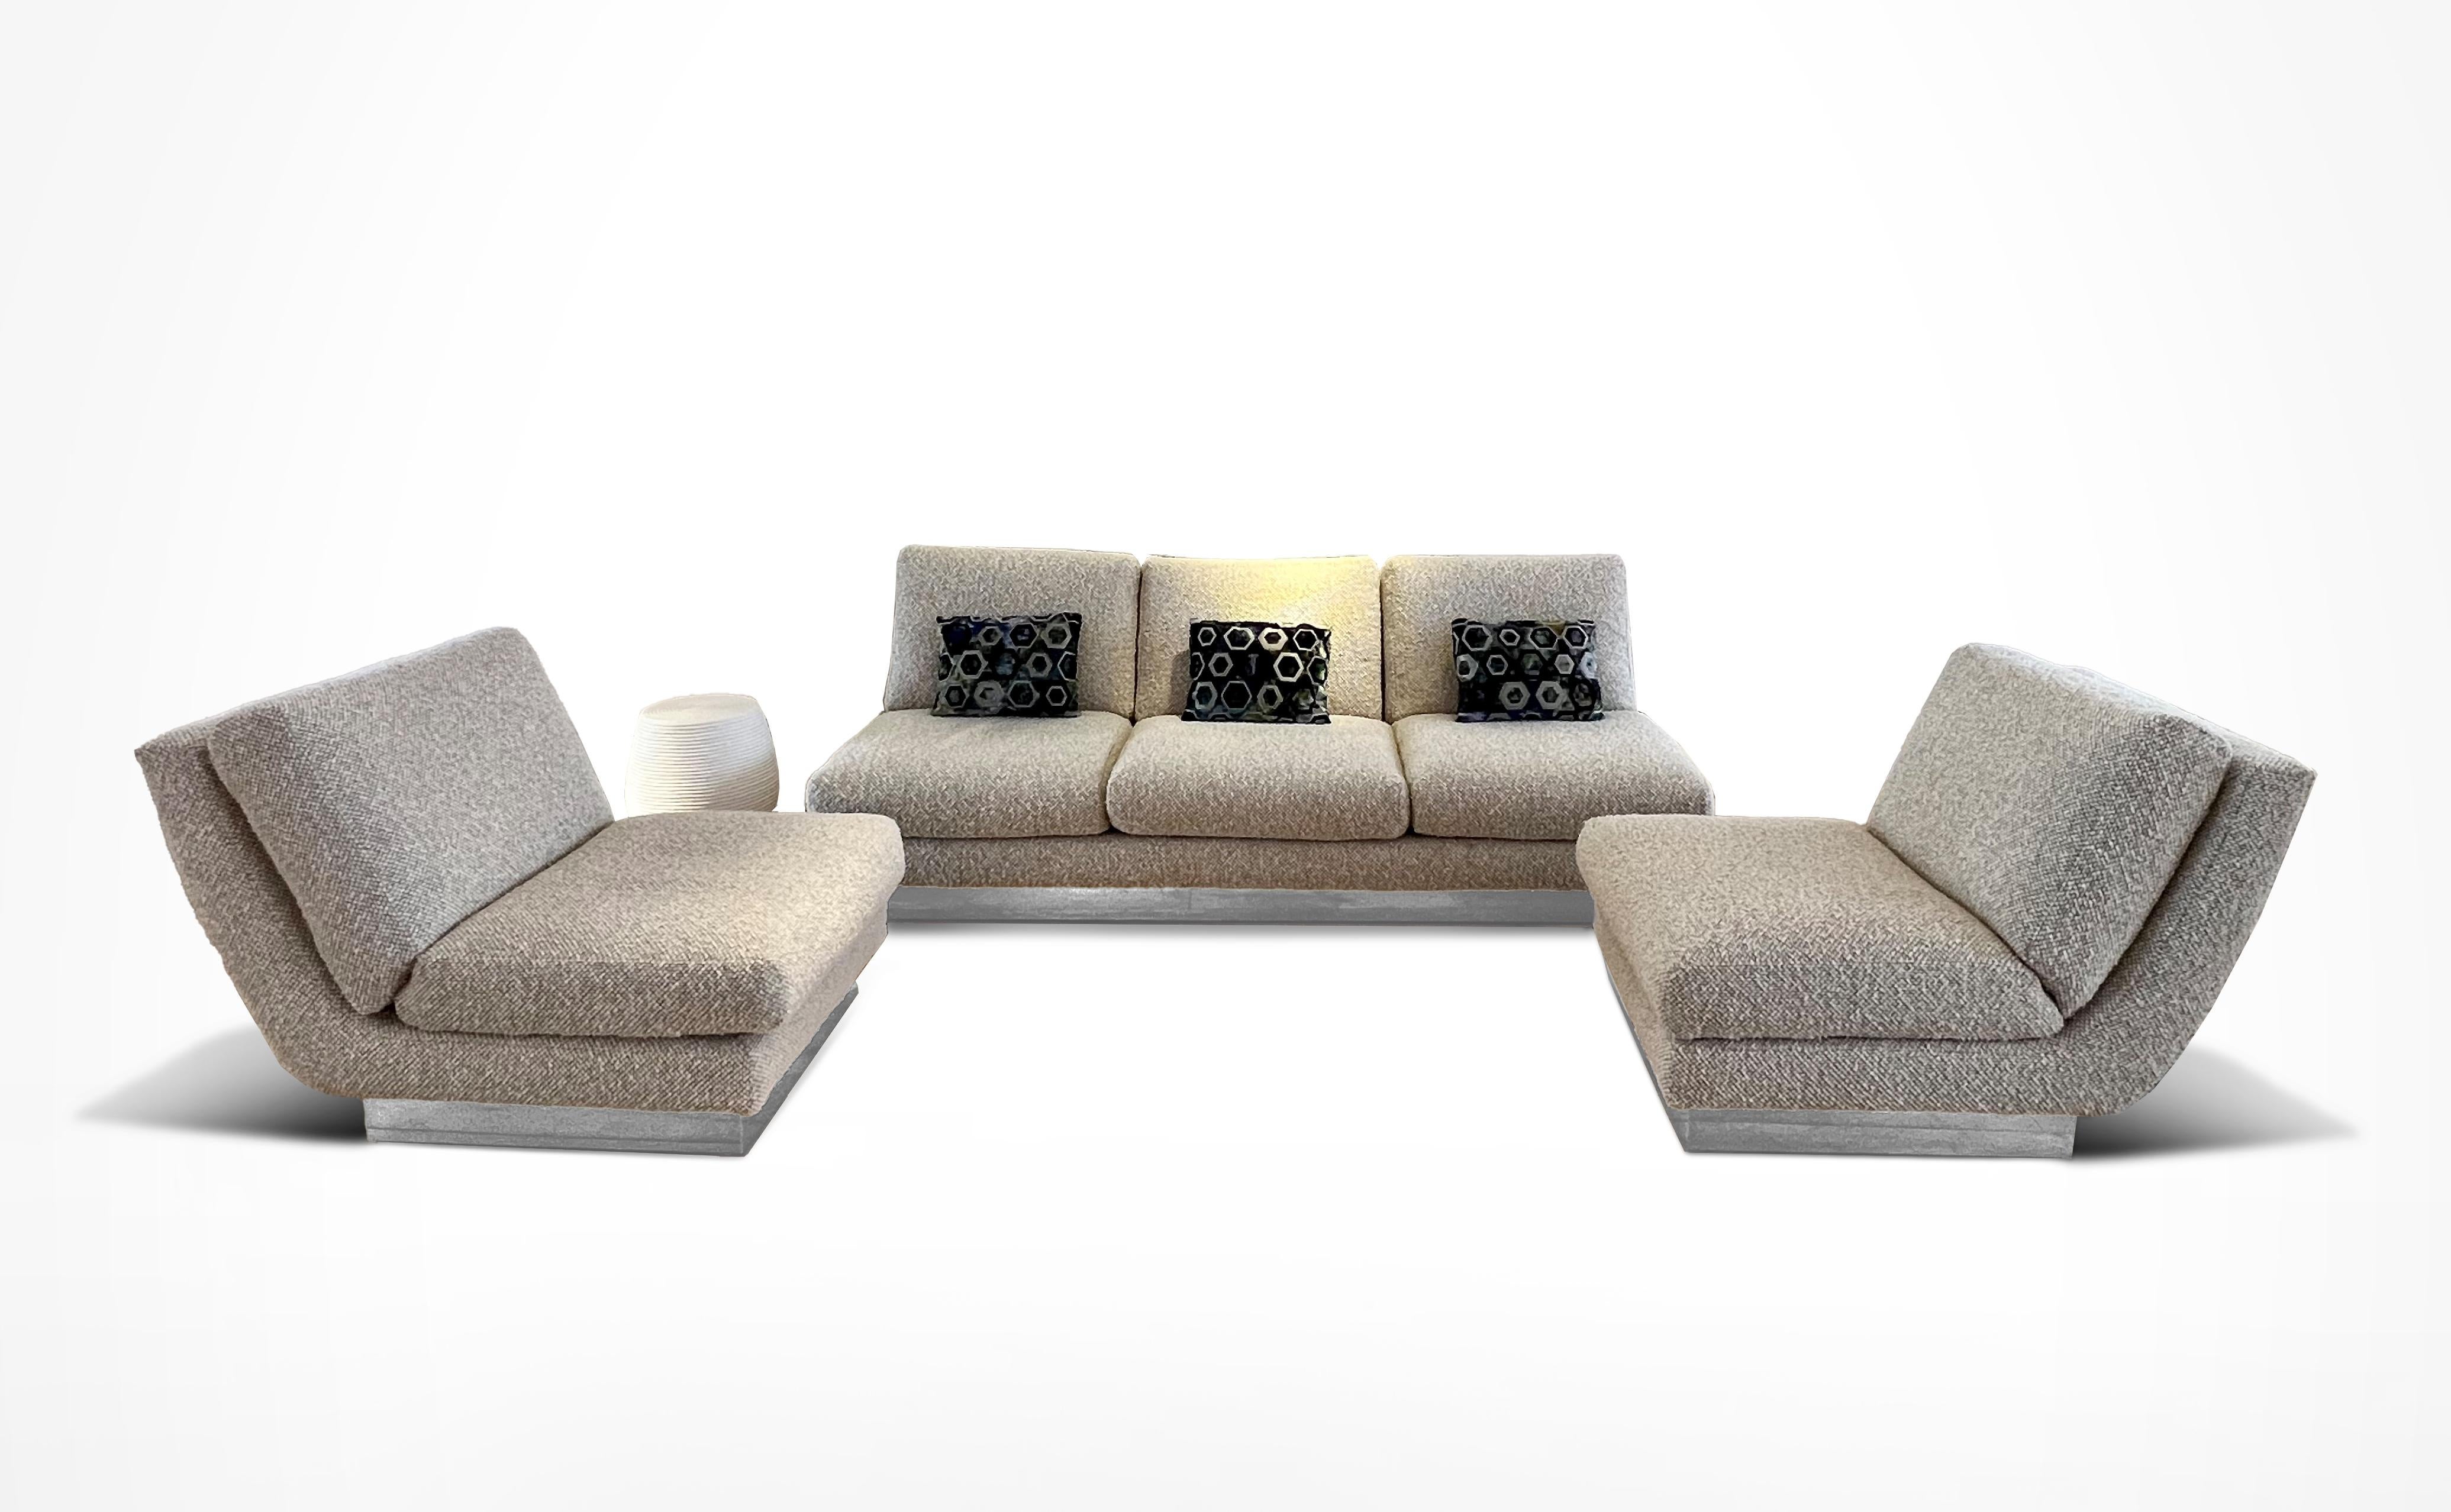 Late 20th Century 'California' Sofa and 2 Chairs, Jacques Charpentier, 1970s For Sale